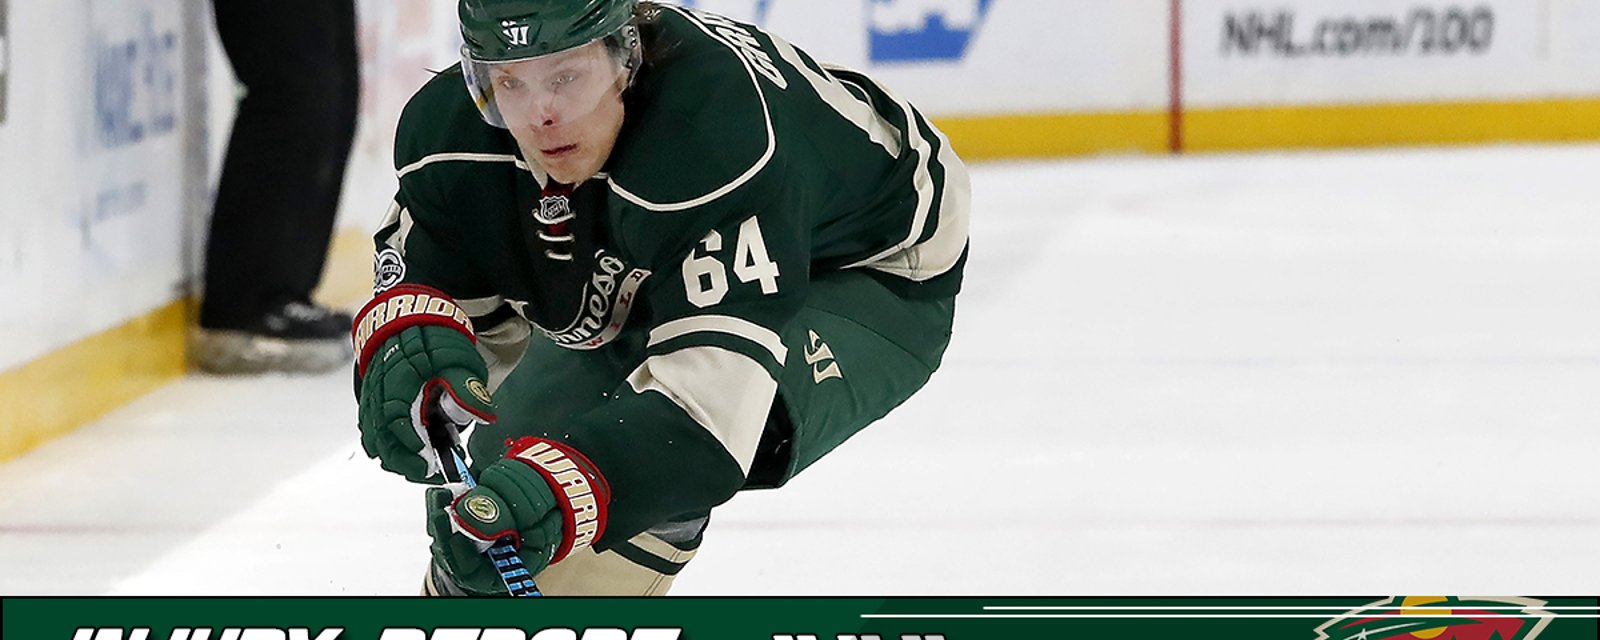 Injury Report: Granlund fought through the pain